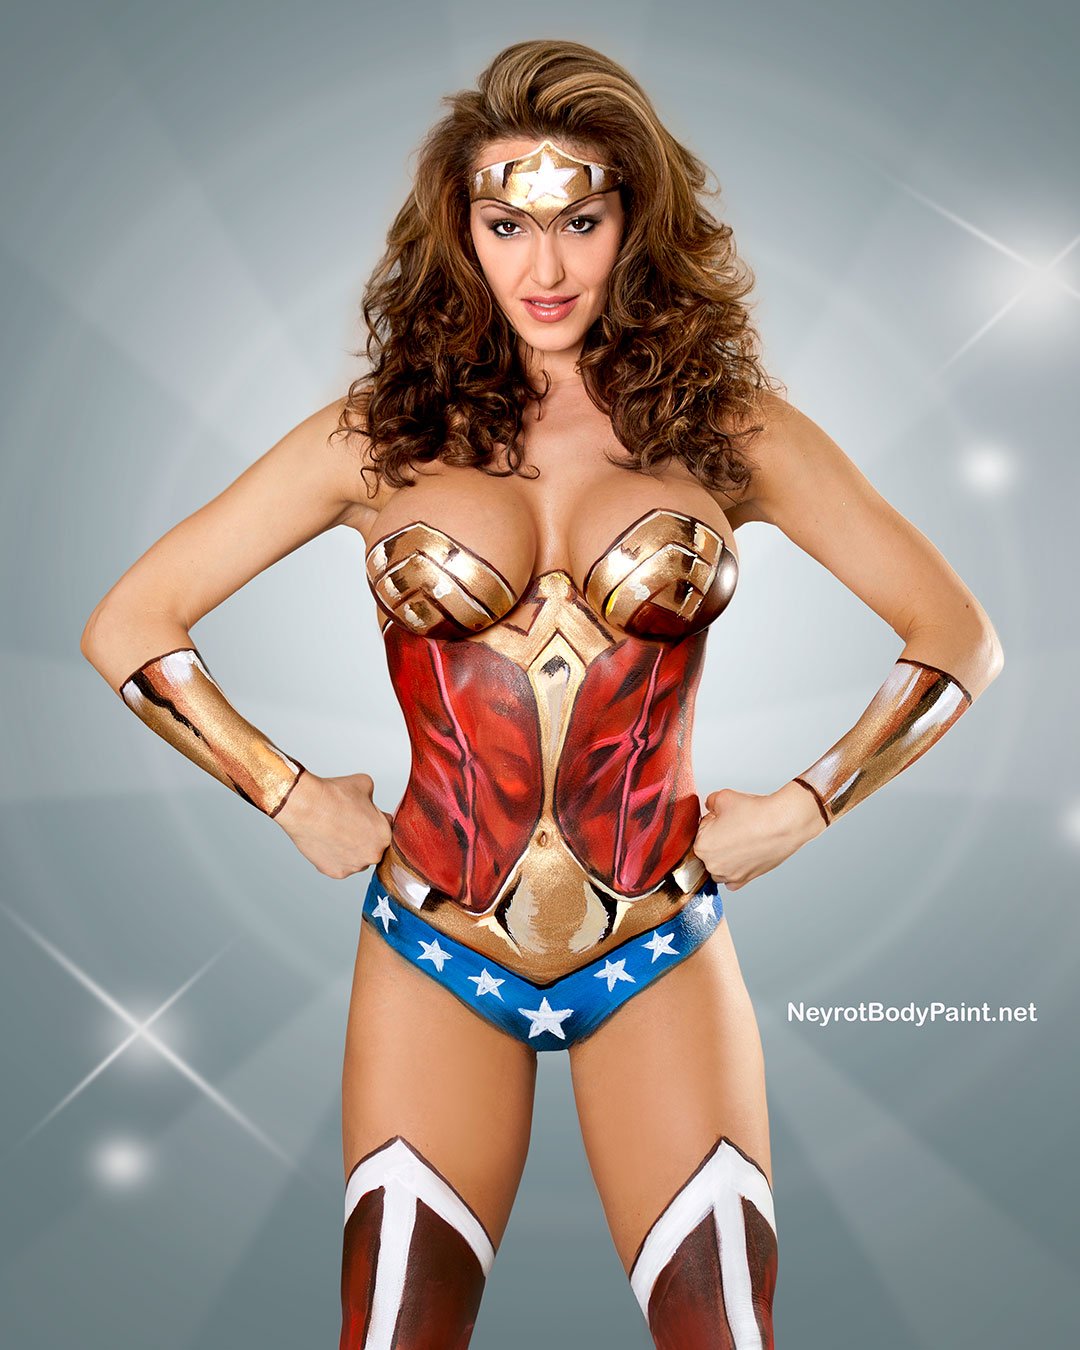 I had the best time body painting her. #bodypainting #wonderwoman #beauty #...